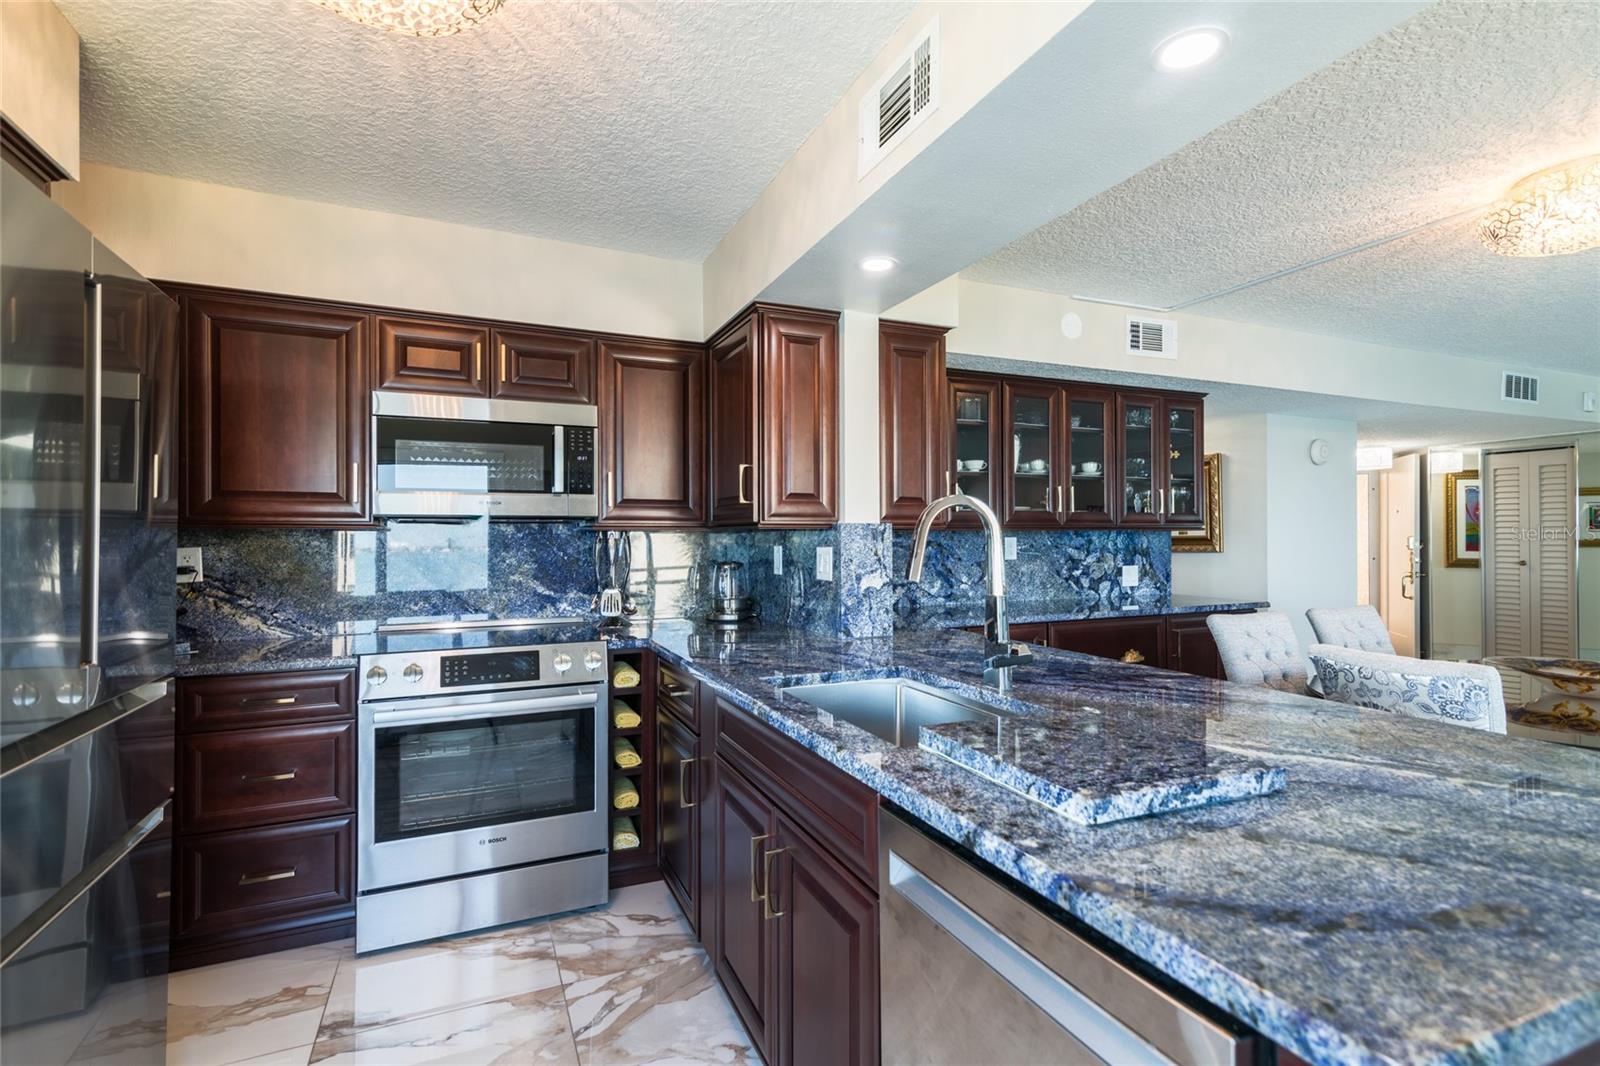 The kitchen has stainless appliances, blue granite countertops, and custom cabinets